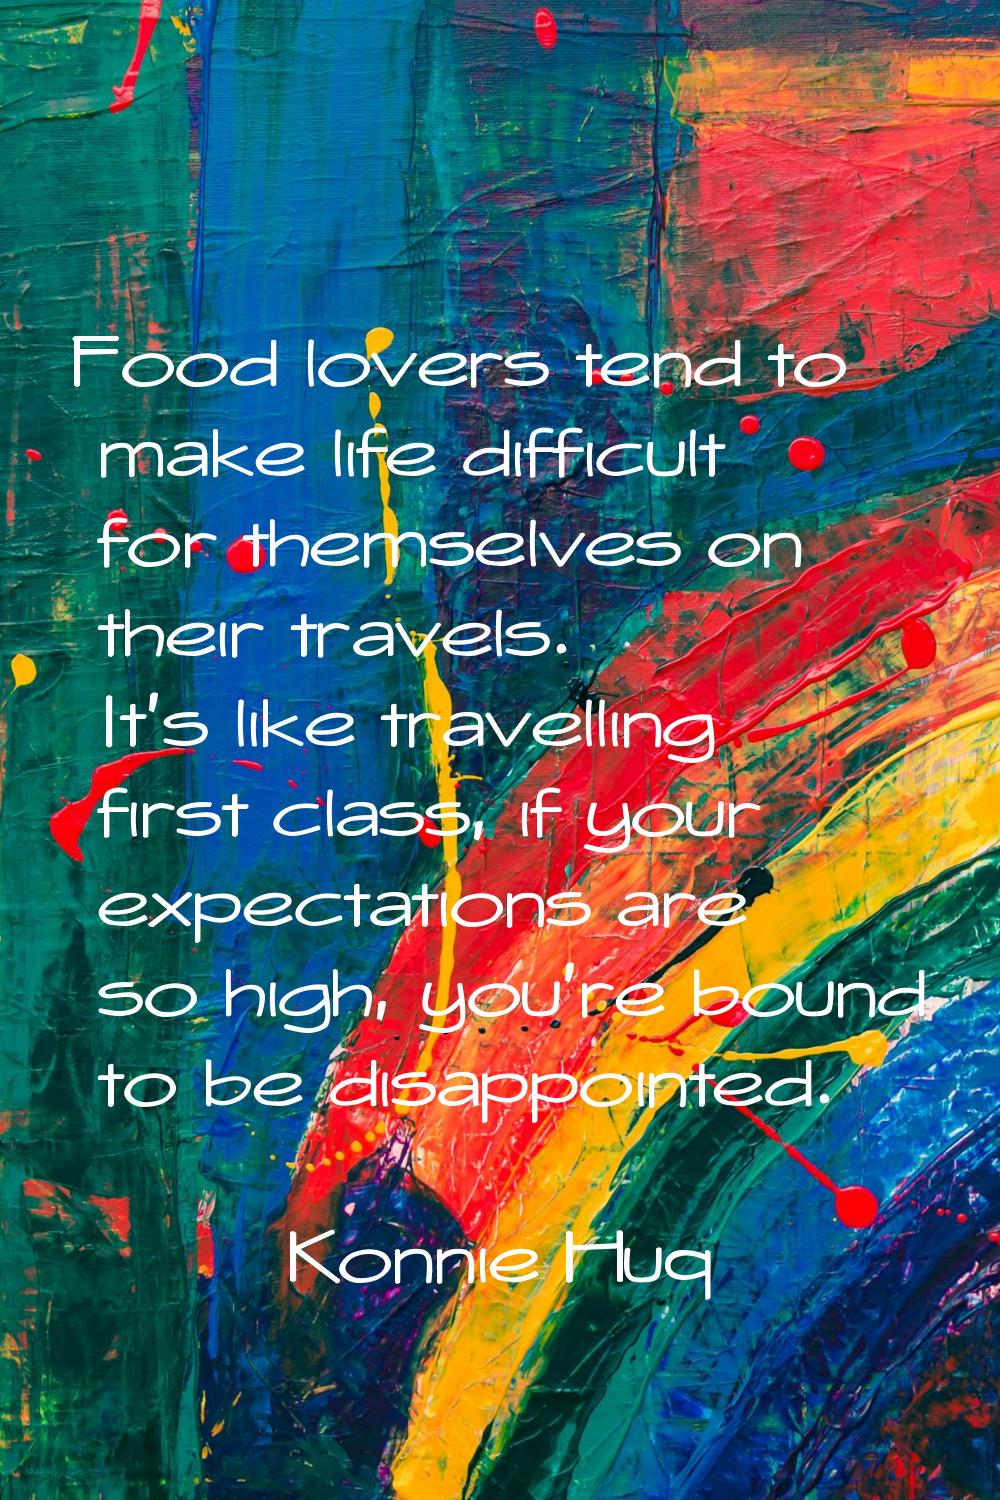 Food lovers tend to make life difficult for themselves on their travels. It's like travelling first